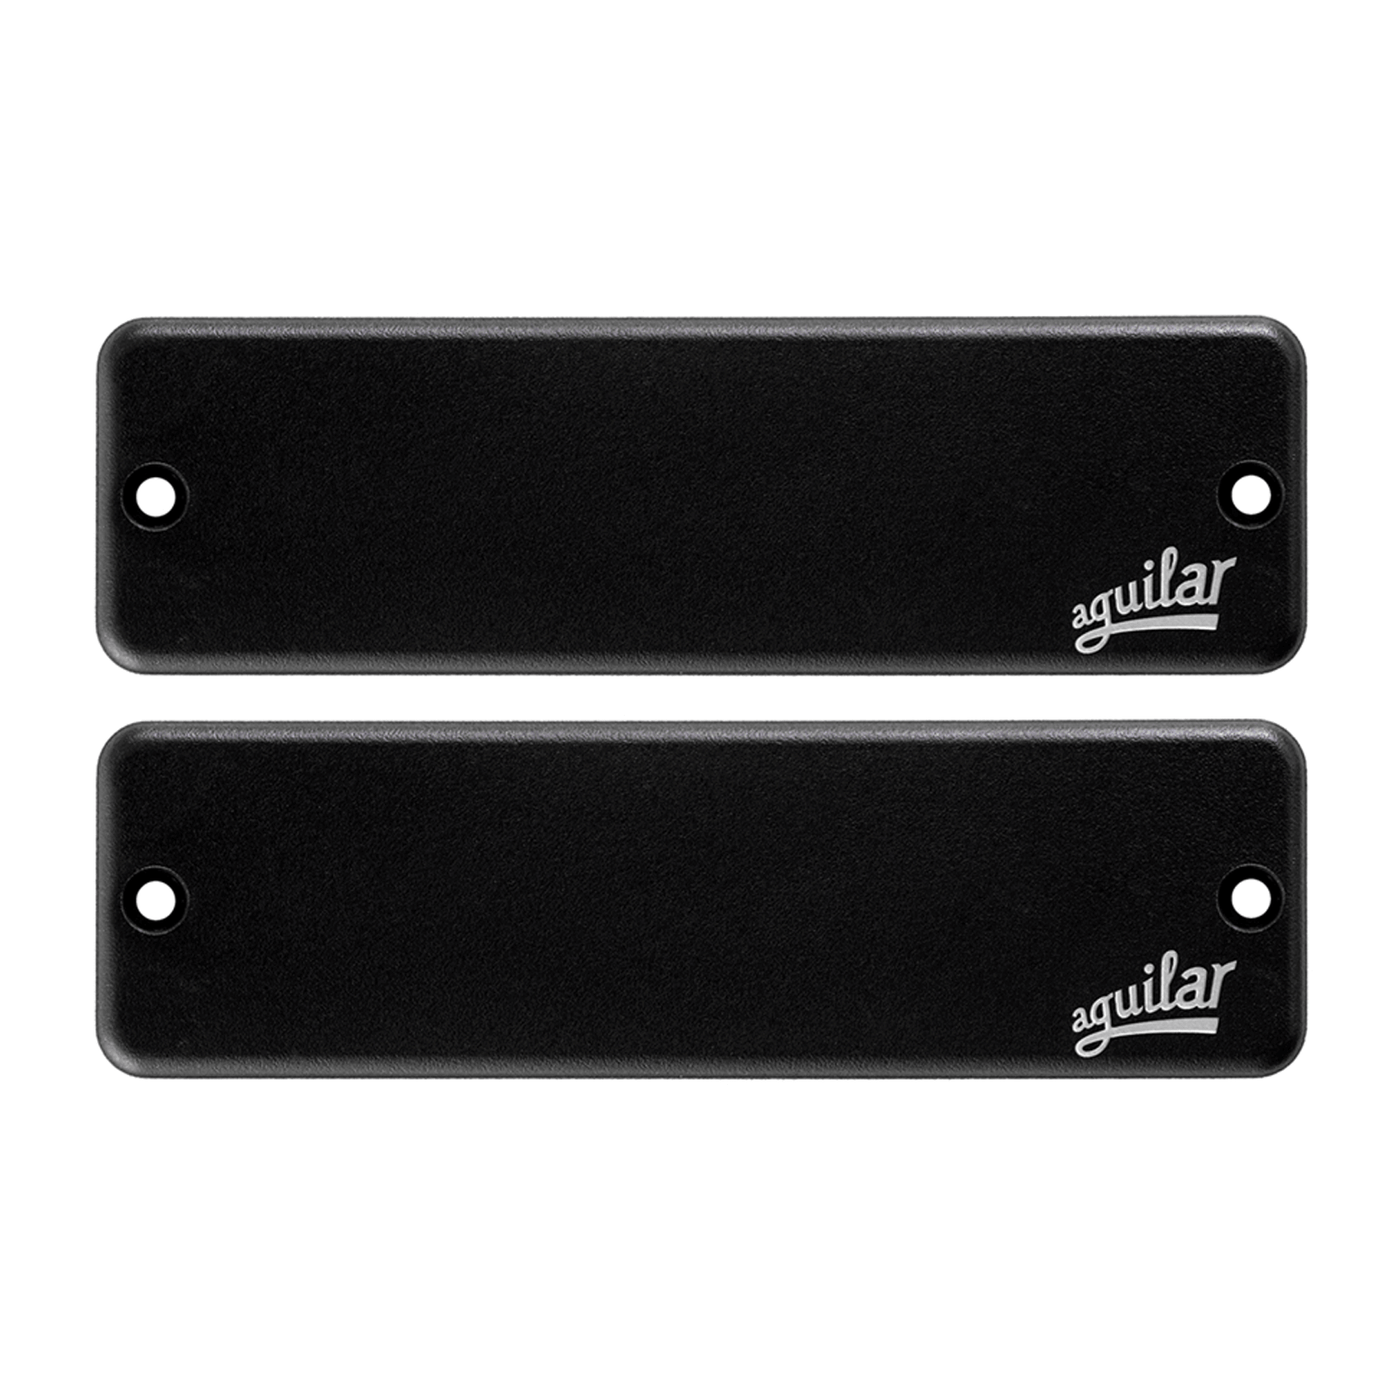 Aguilar DCB-G4 - Descripción:The DCB pickups use our dual-ceramic bar design to capture all the detail and character of your tone. The pickup’s uniform magnetic field ensures that no information is lost, making this a great pickup for dynamic playing styl